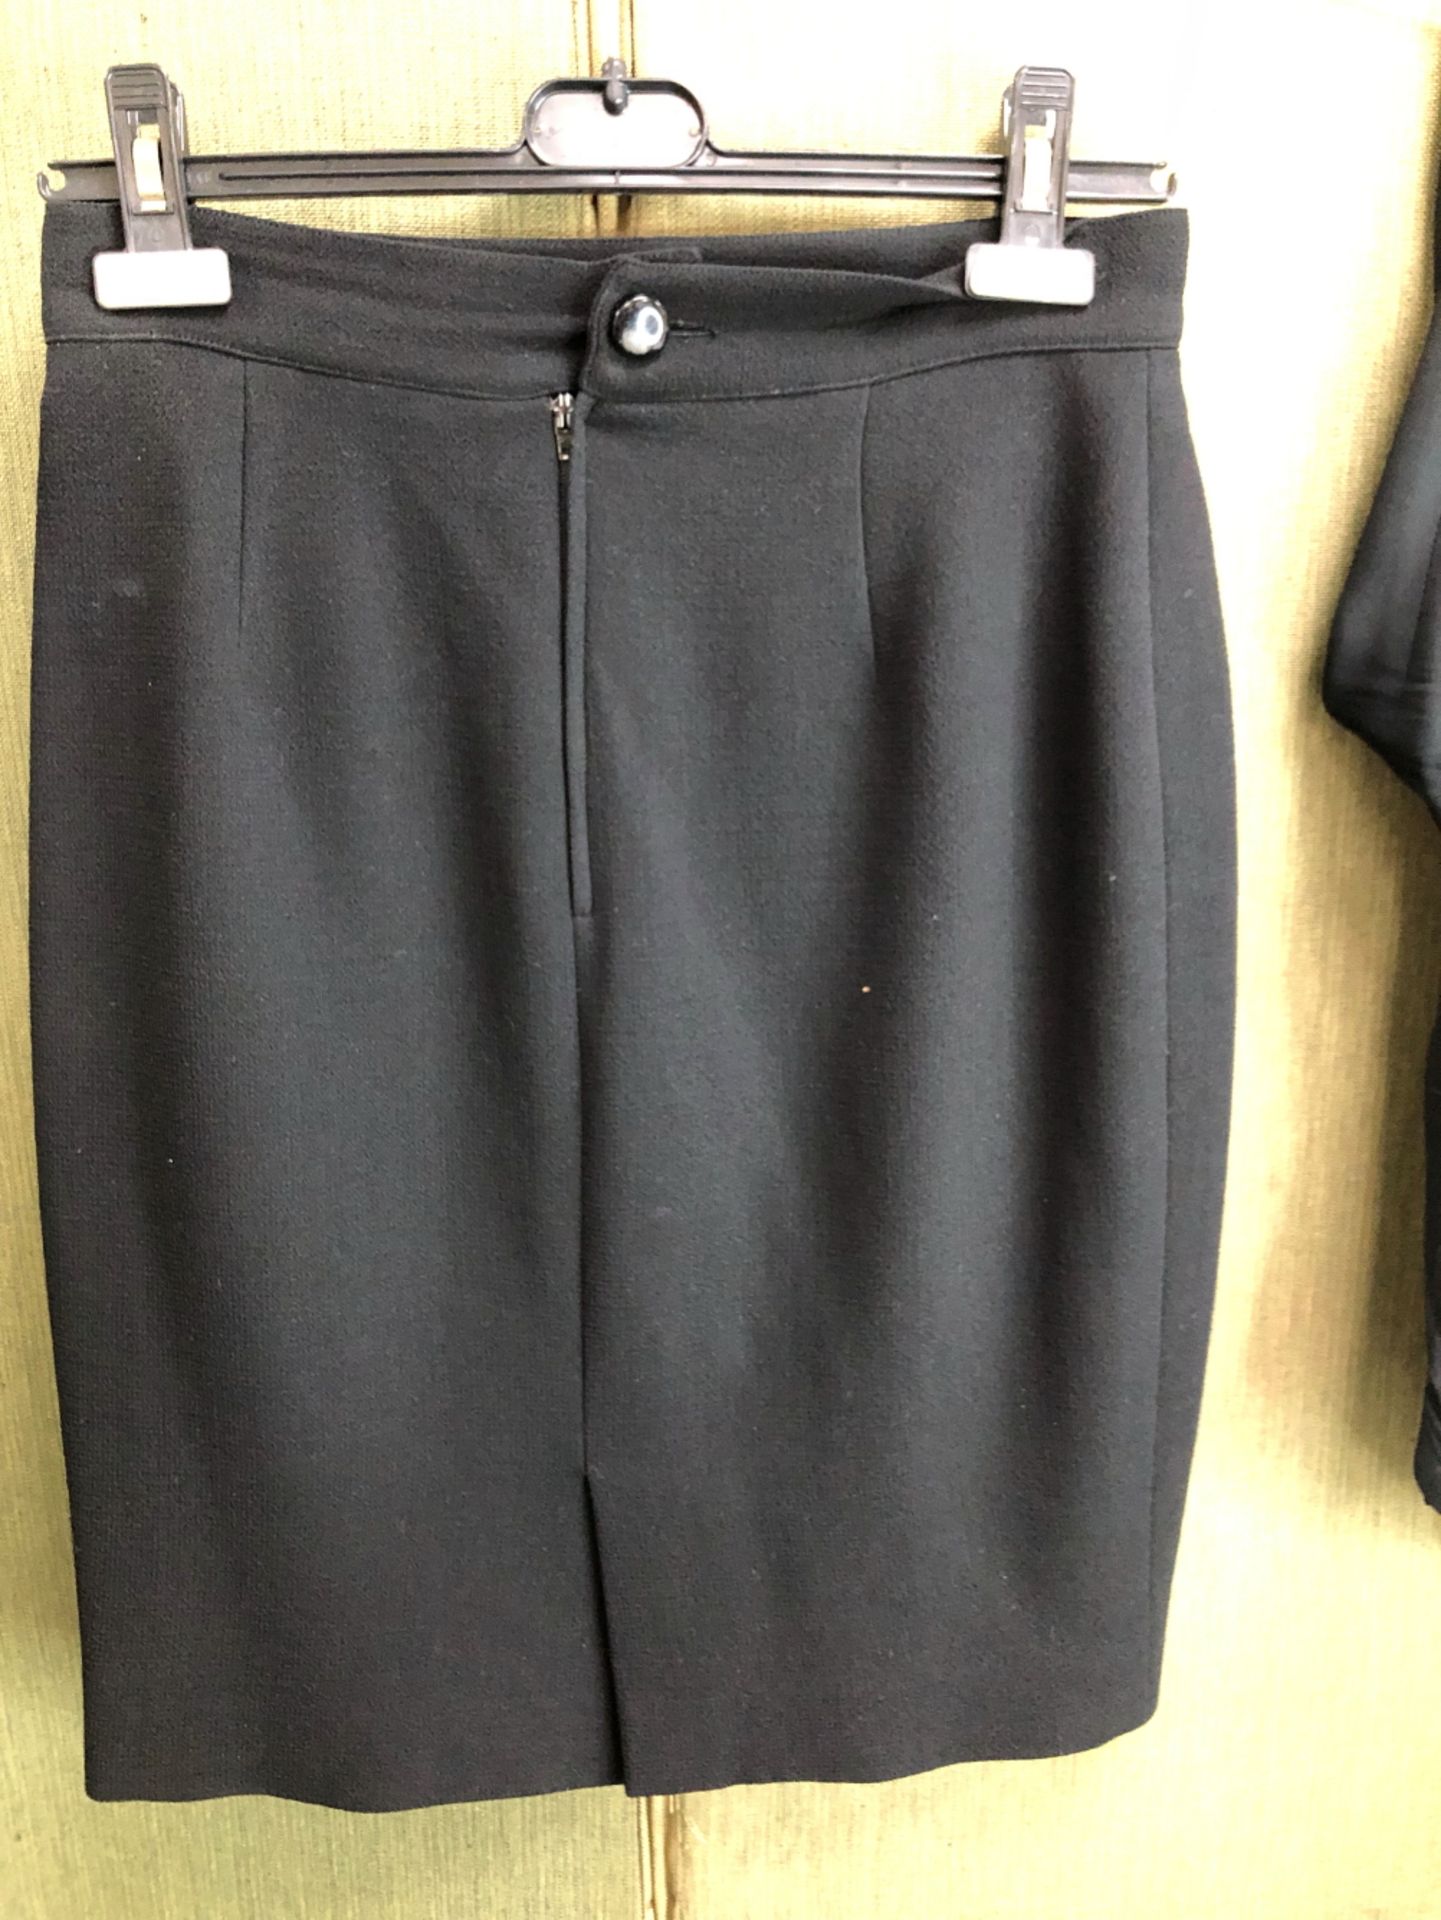 A GENNY BLACK WOOL SKIRT GB 34, A PAIR OF BLACK JOSEPH TROUSERS SIZE 42, A BLACK RENA LANGE T-SHIRT, - Image 12 of 16